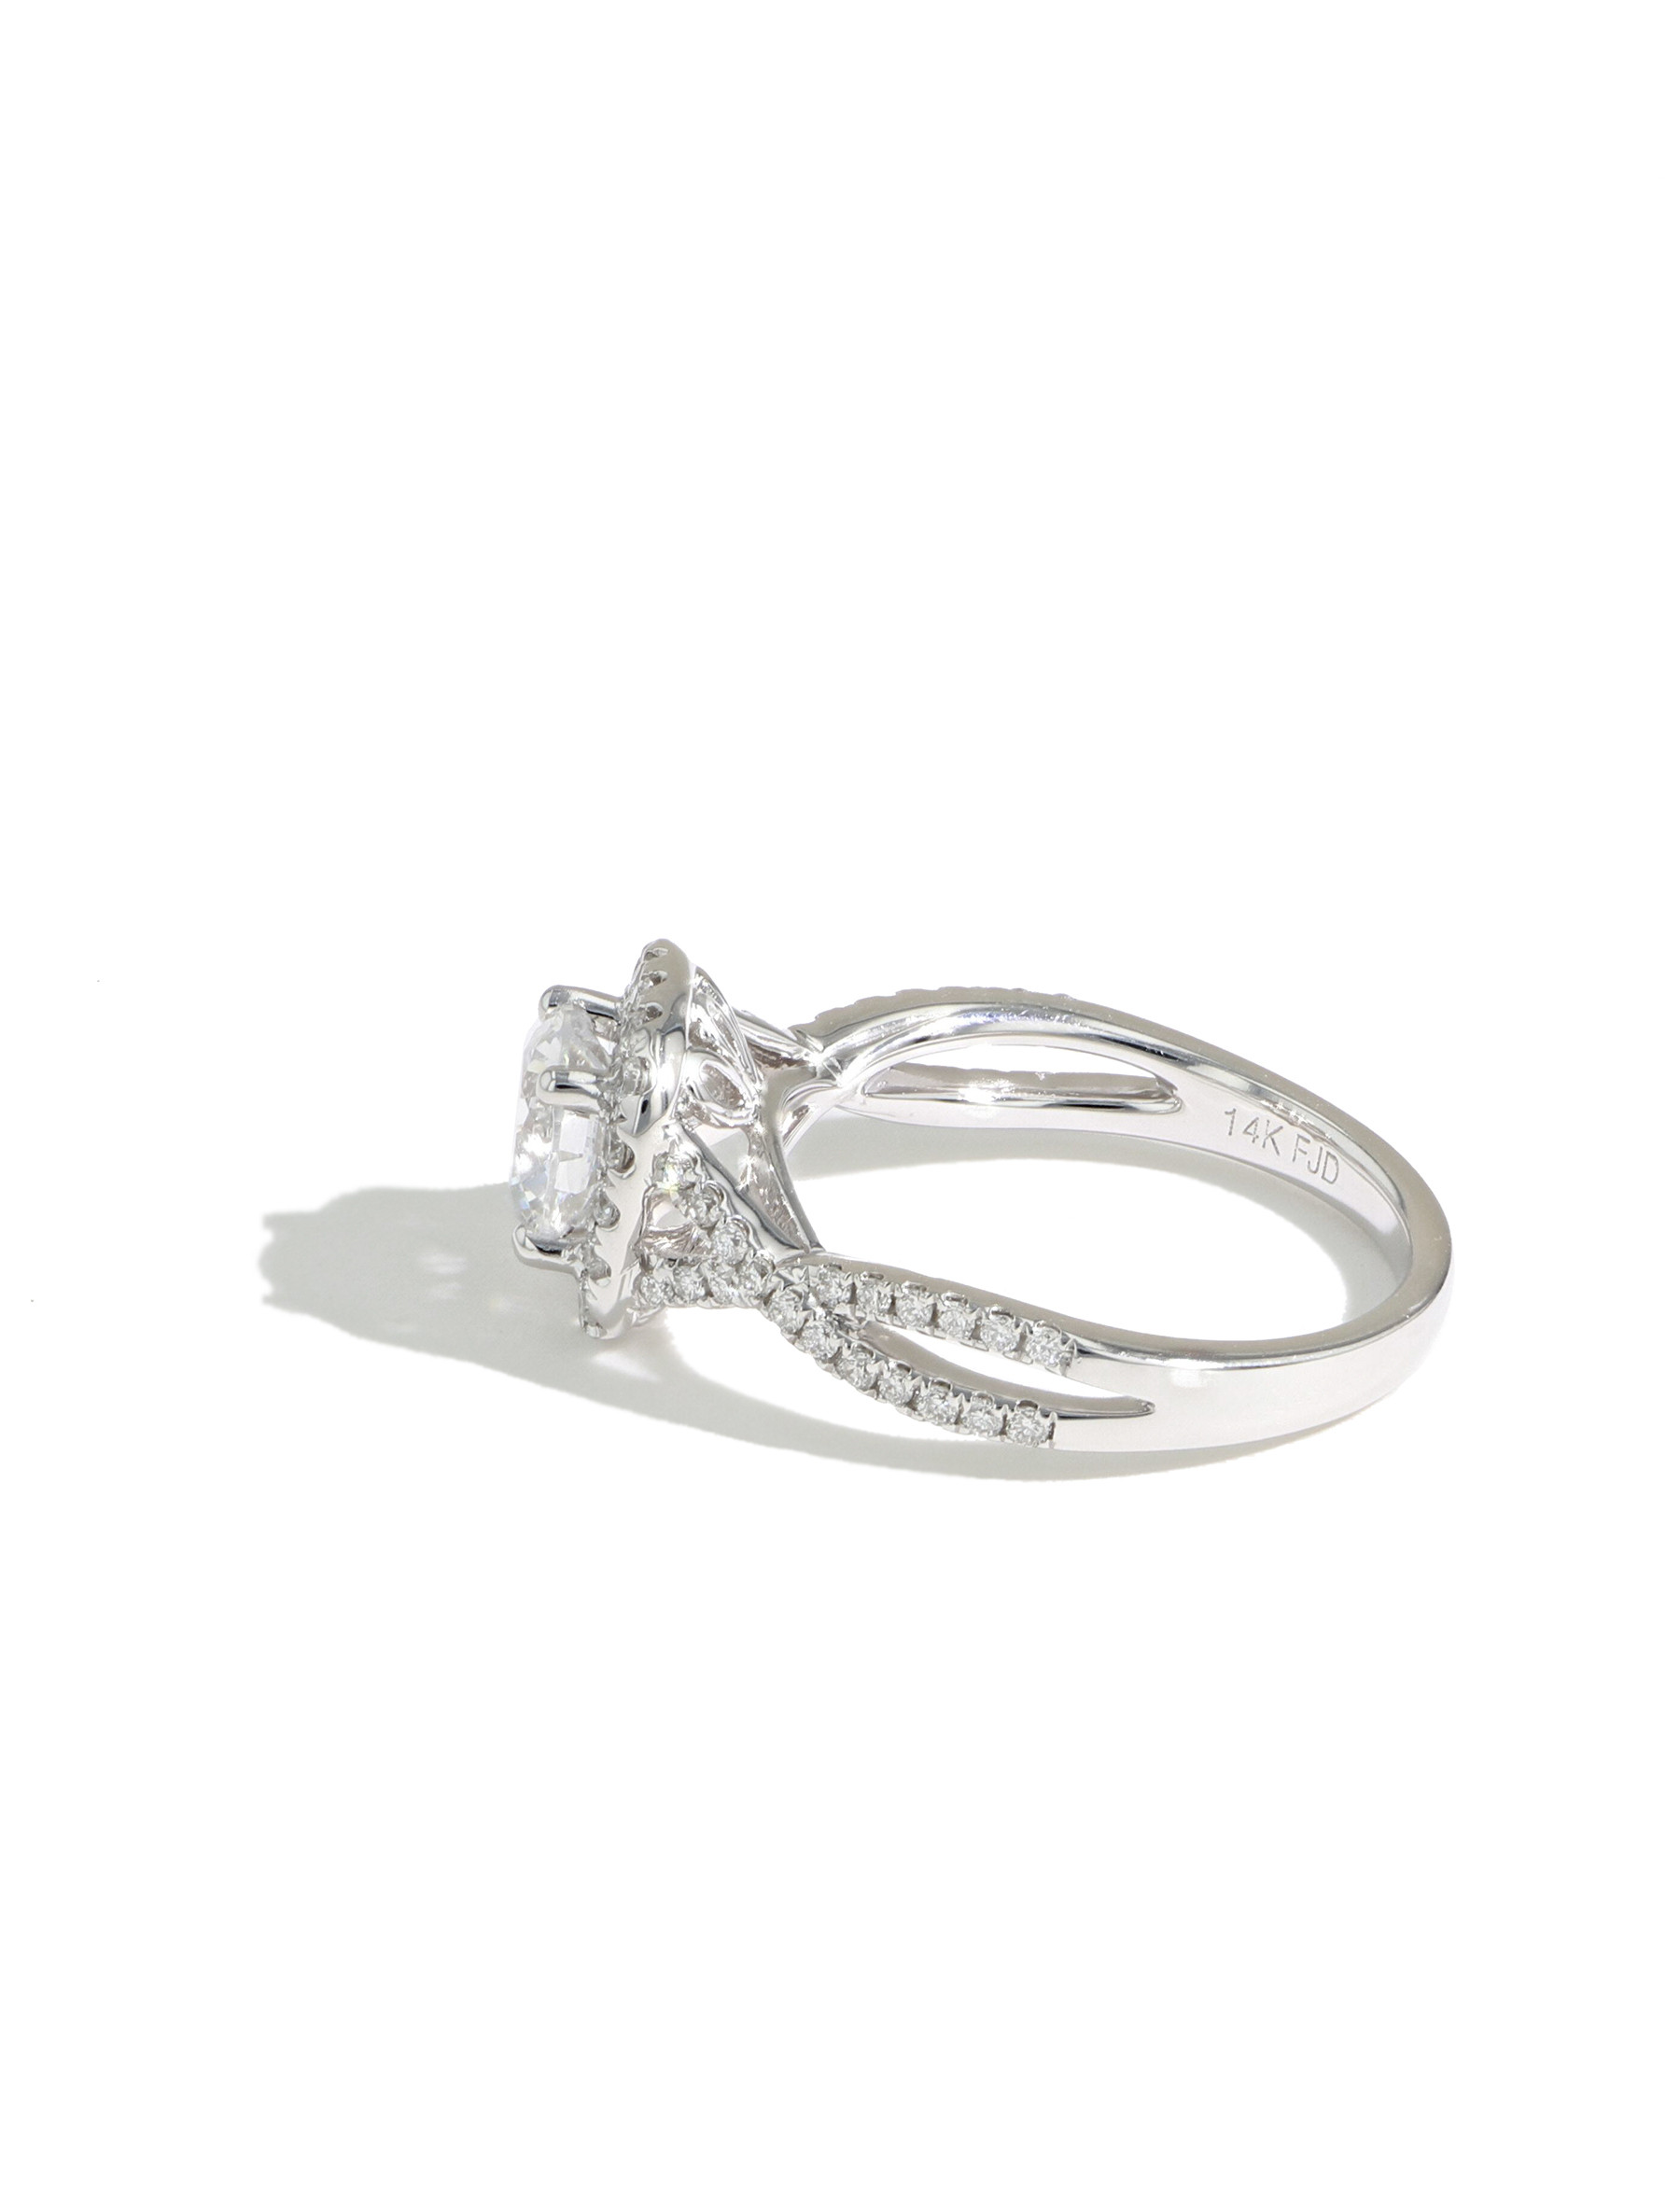 The Round Cushion Halo Twisted Engagement Ring Setting side view